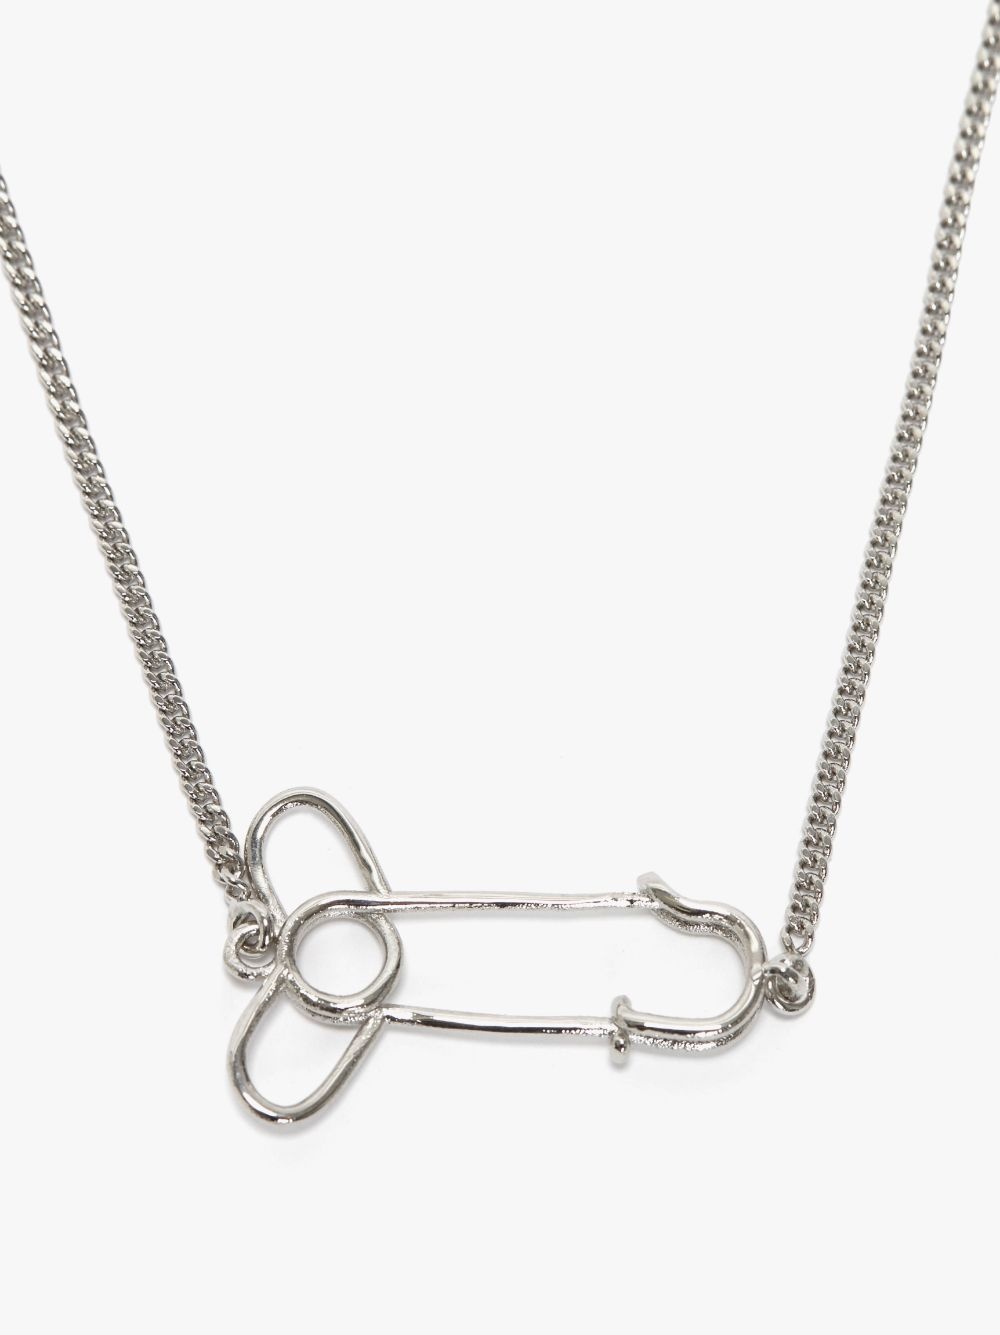 PENIS PIN PENDANT NECKLACE - 2